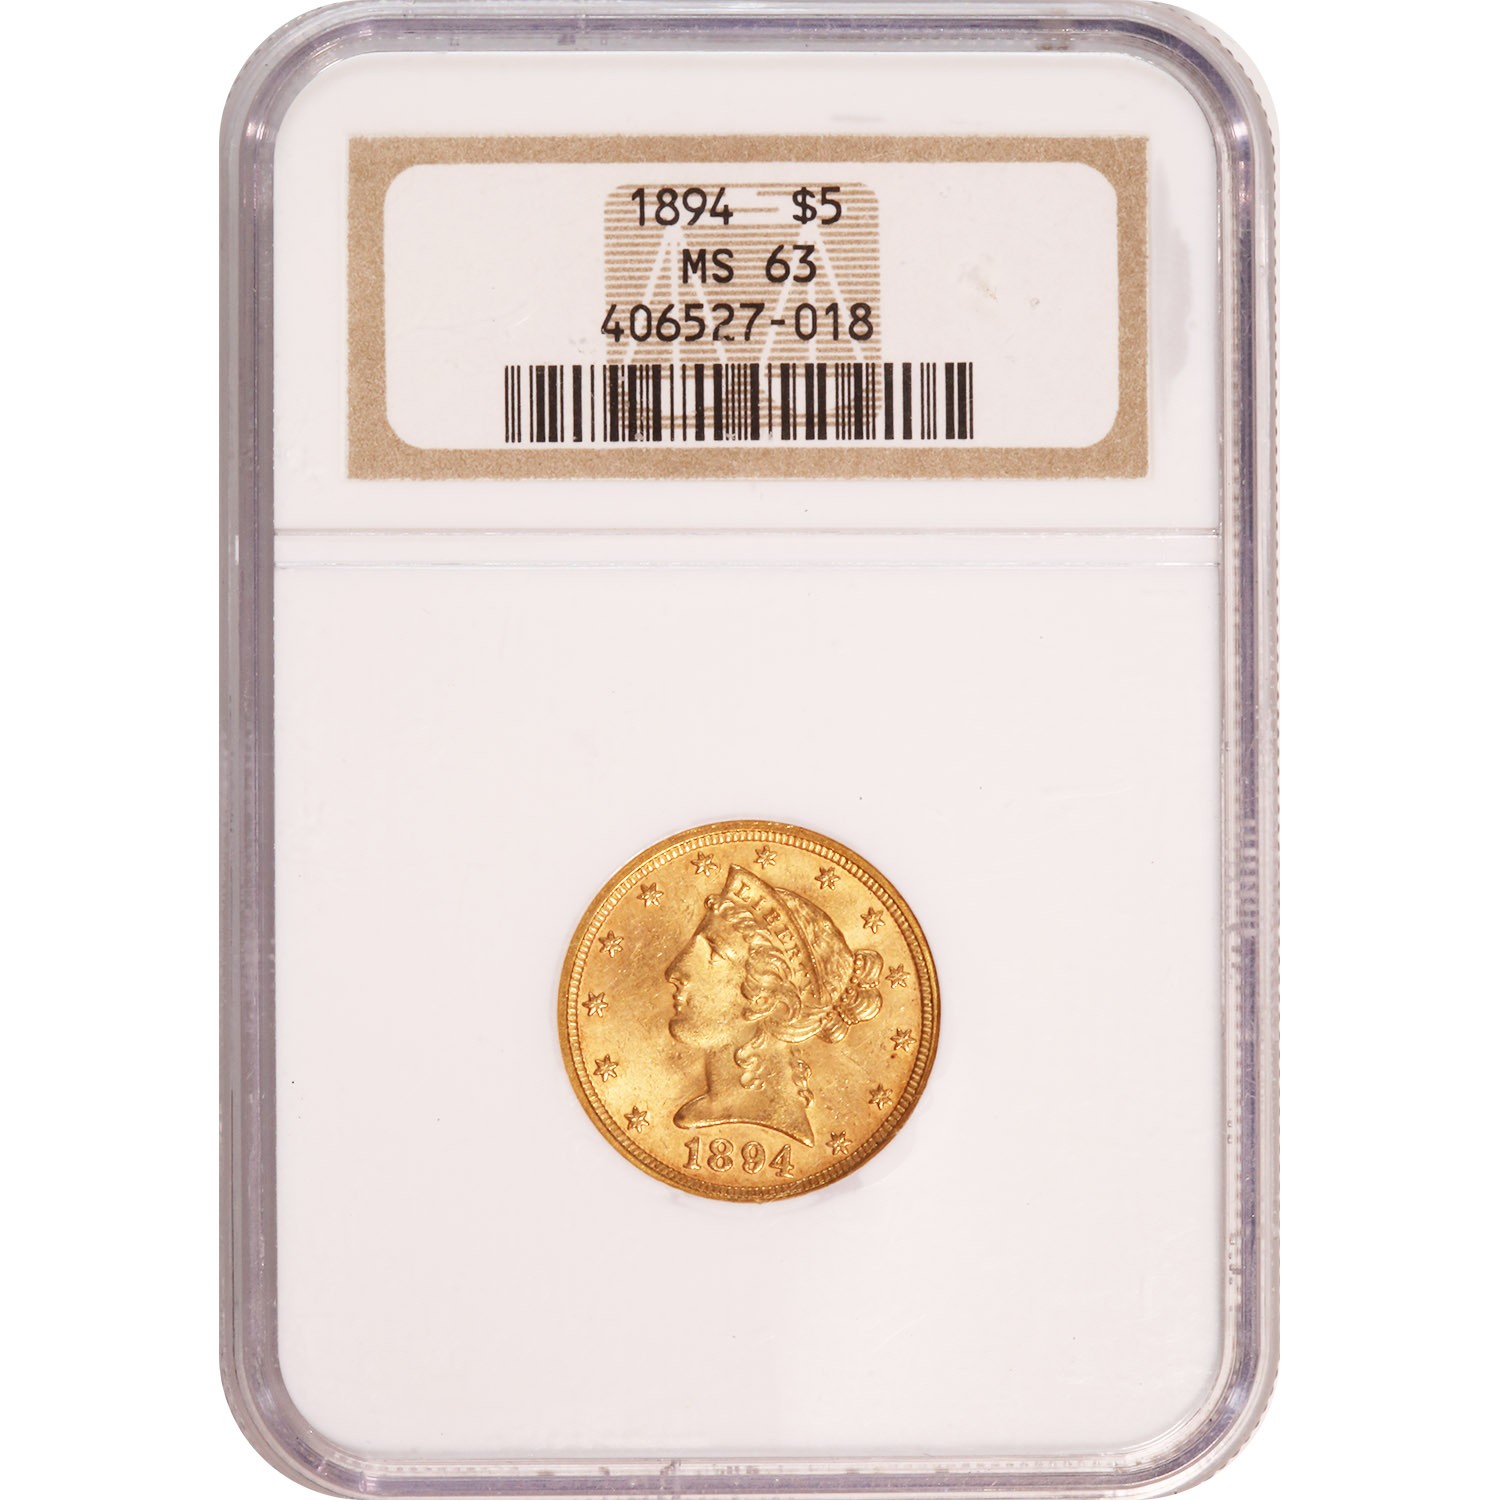 Certified $5 Gold Liberty 1894 MS63 NGC